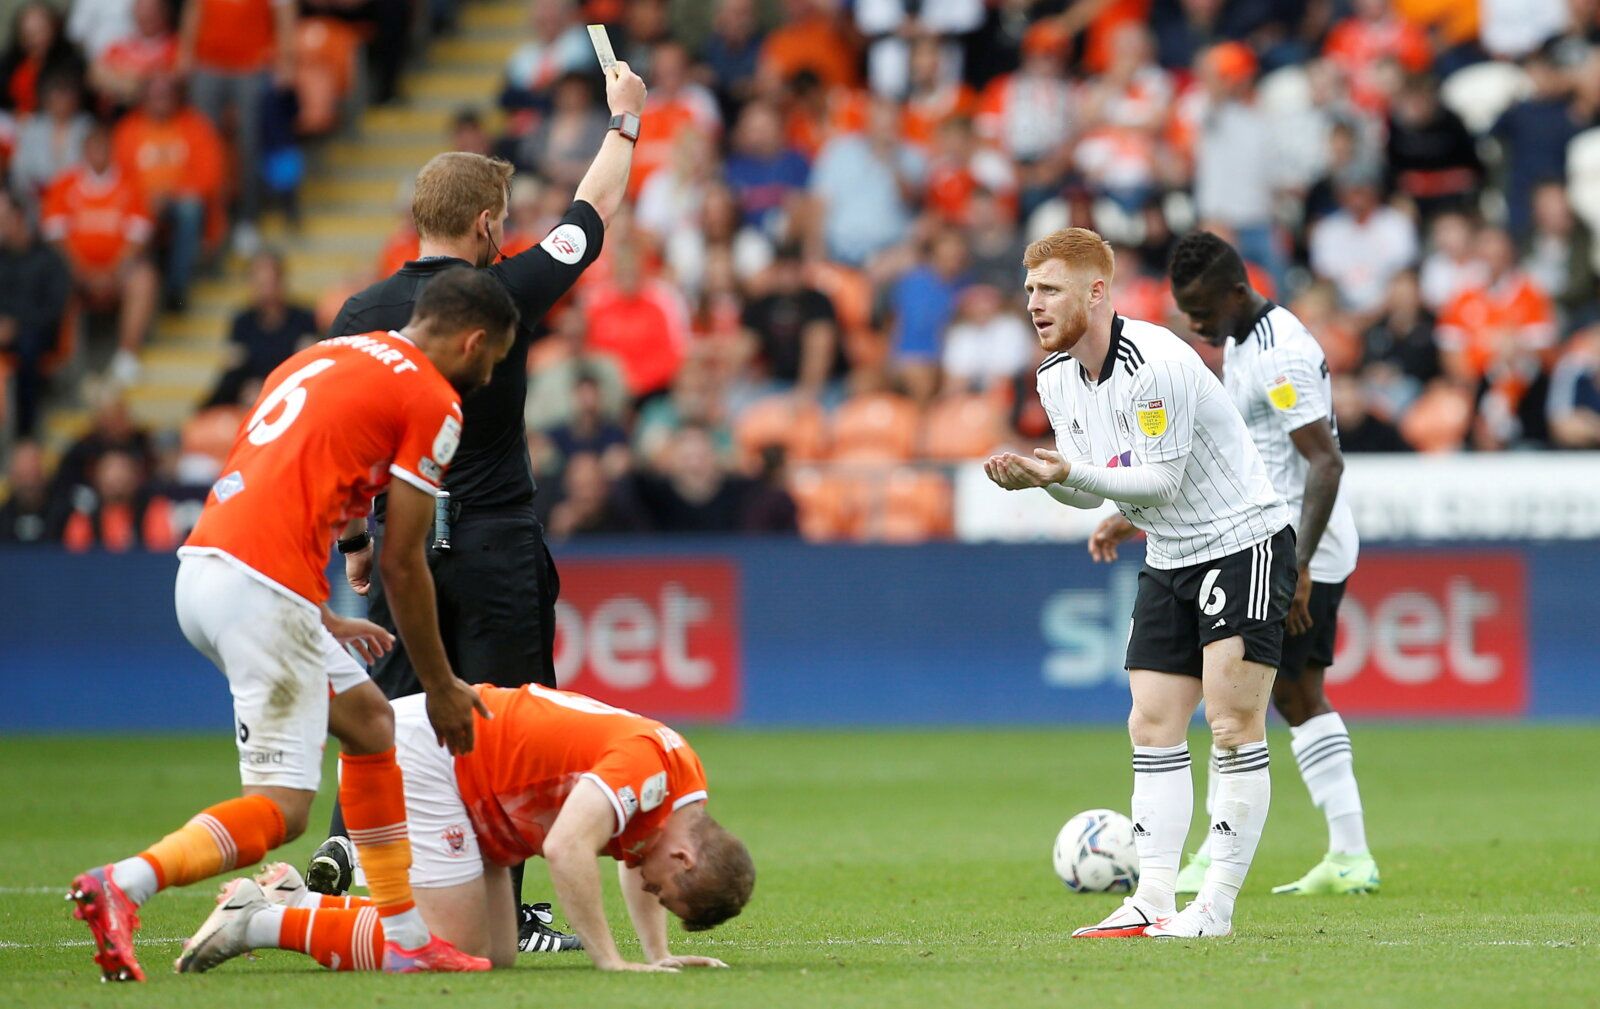 Soccer Football - Championship - Blackpool v Fulham - Bloomfield Road, Blackpool, Britain - September 11, 2021 Fulham's Harrison Reed is shown a yellow card by referee  Action Images/Craig Brough  EDITORIAL USE ONLY. No use with unauthorized audio, video, data, fixture lists, club/league logos or "live" services. Online in-match use limited to 75 images, no video emulation. No use in betting, games or single club/league/player publications.  Please contact your account representative for further